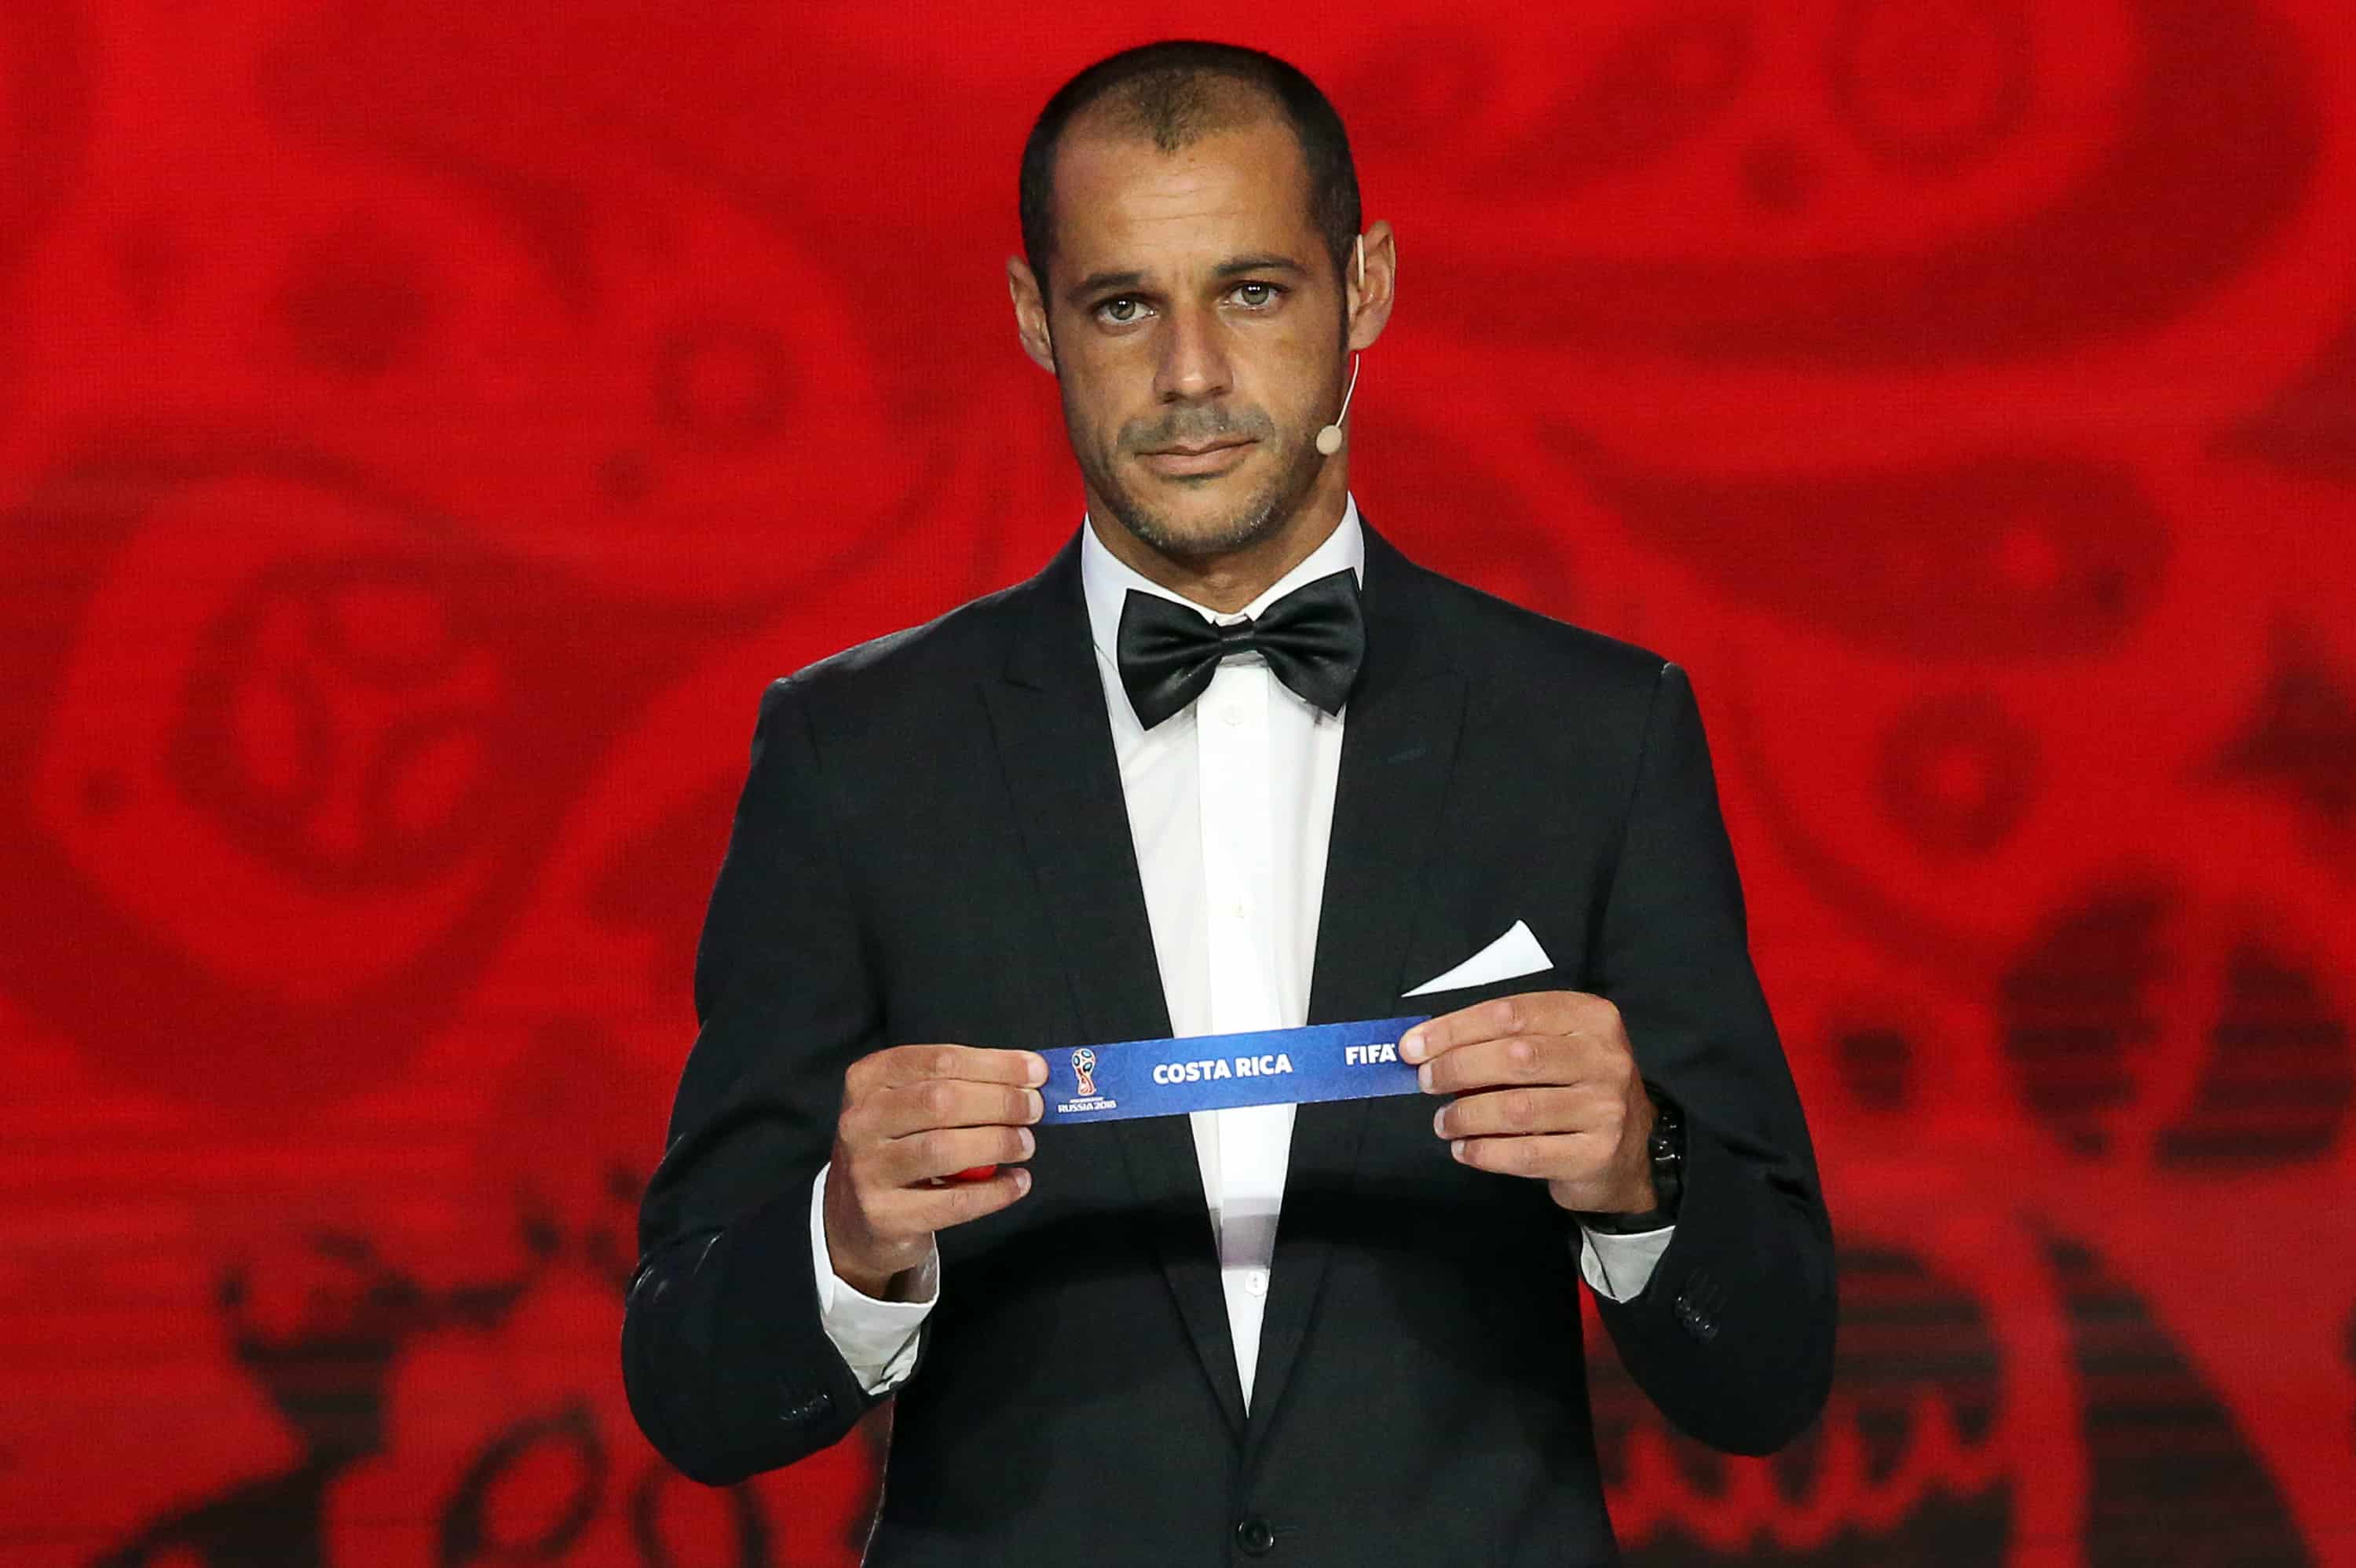 Portugal's beach soccer team forward and captain Madjer shows the name of Costa Rica during the preliminary draw for the Confederation of North, Central American and Caribbean Association Football.